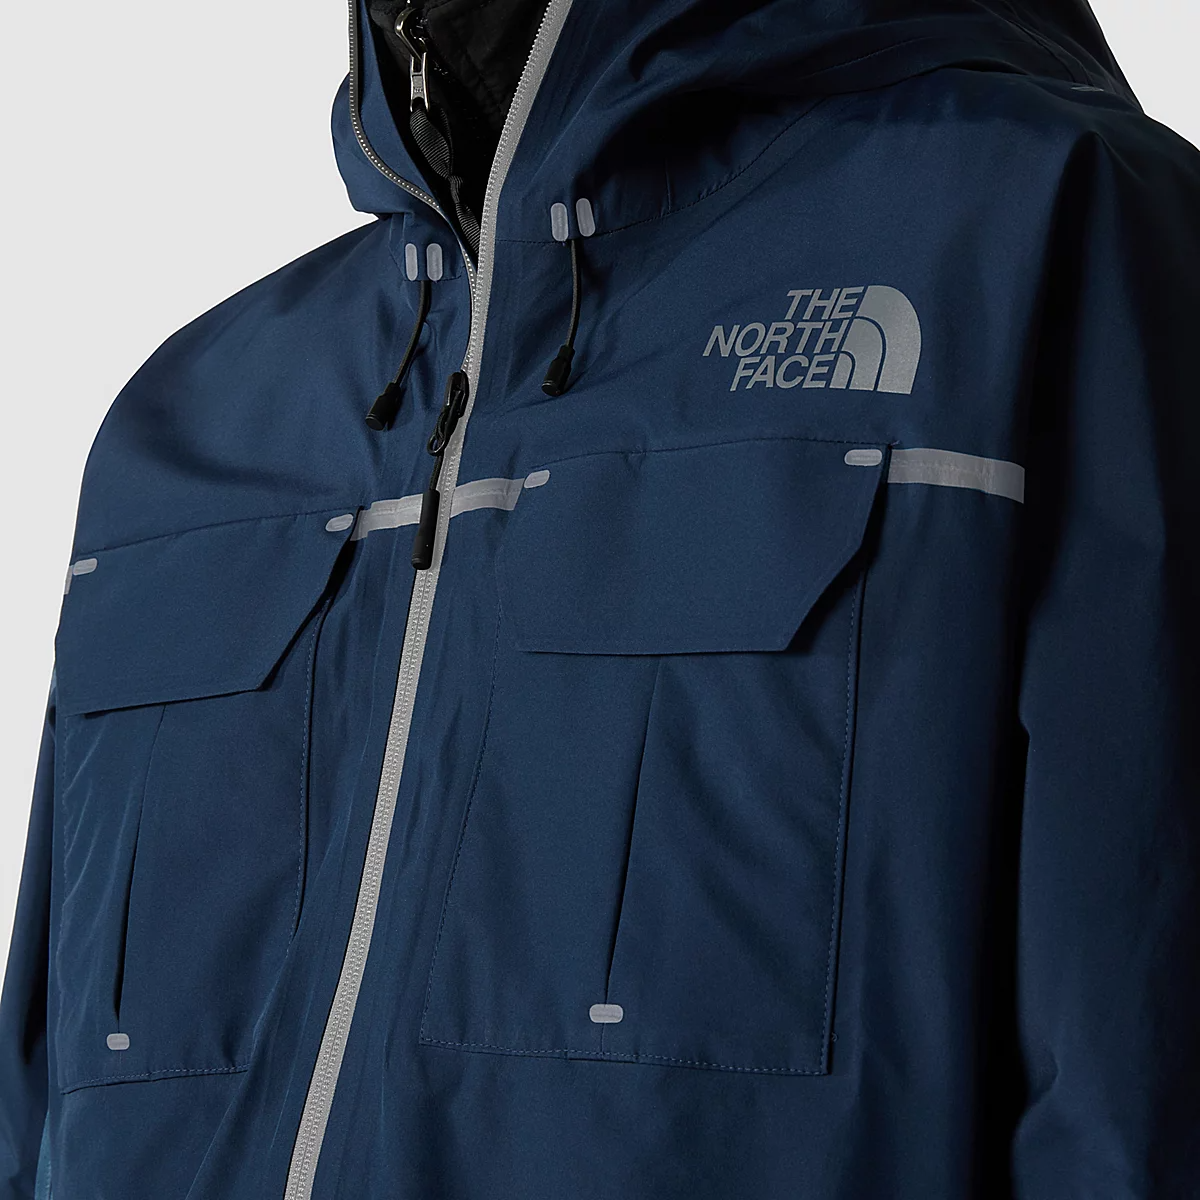 Norse Store | Shipping Worldwide - The North Face M RMST FUTURELIGHT ...